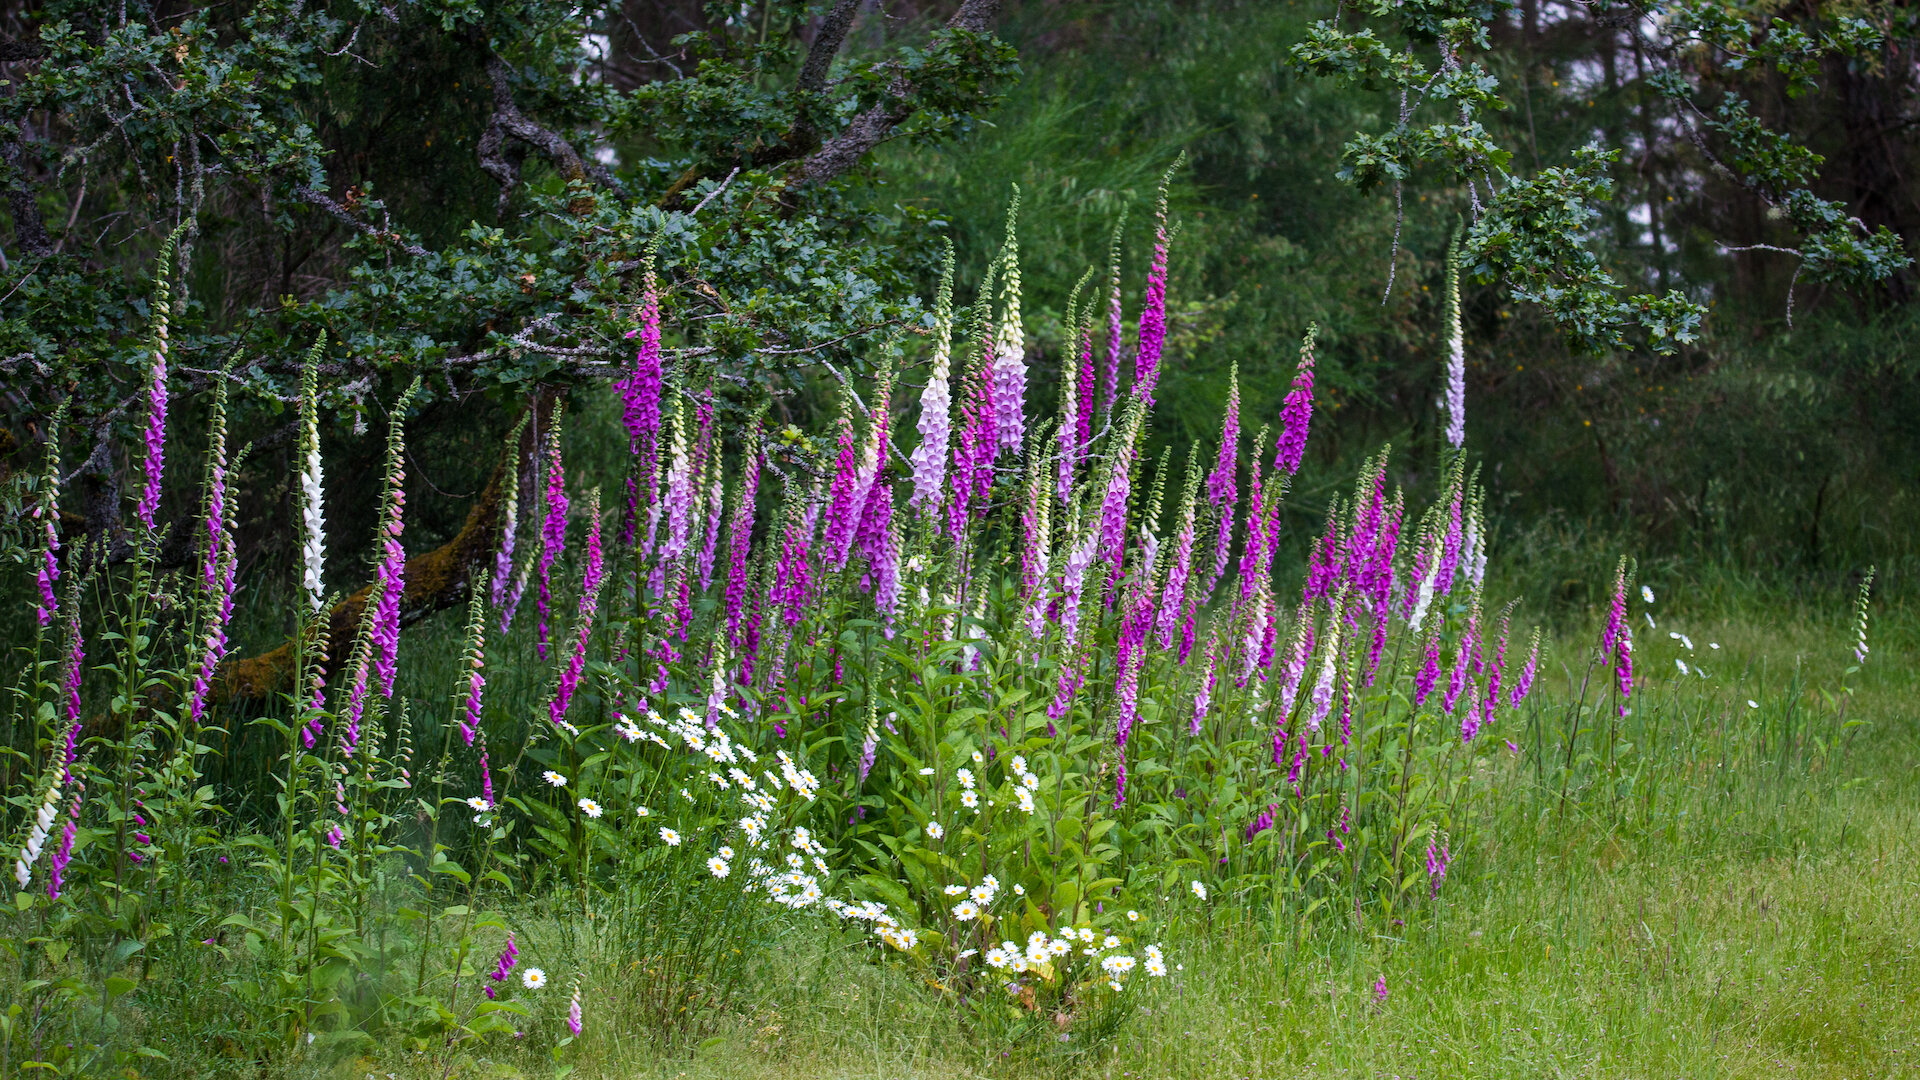  The foxglove has exploded this spring. 